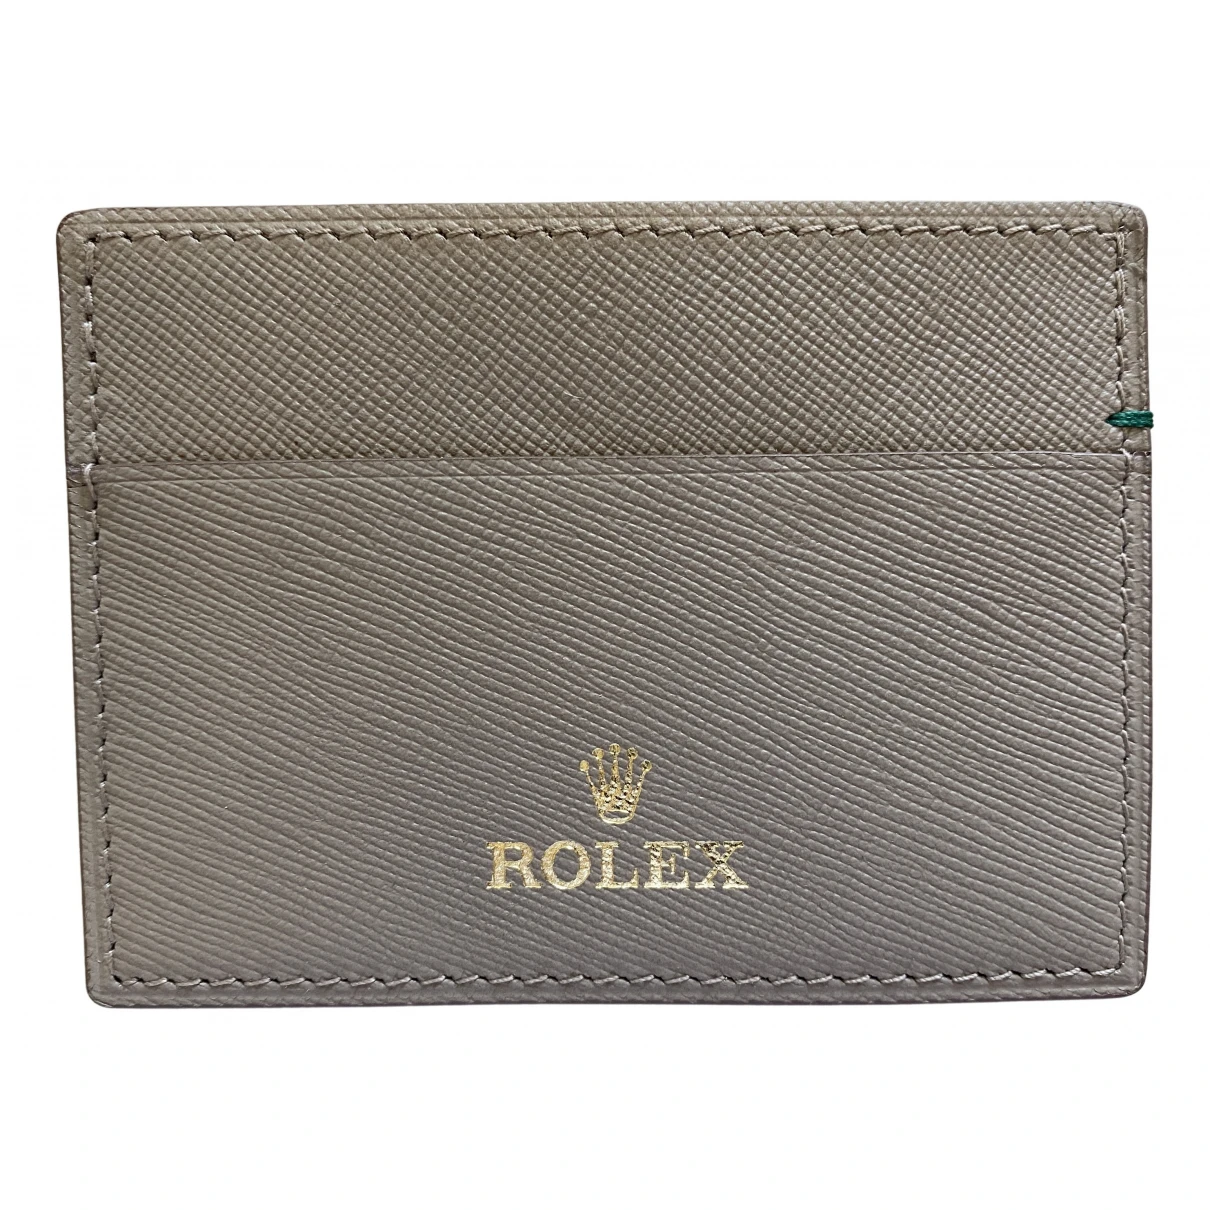 bags Rolex small bags, wallets & cases for Male Leather. Used condition